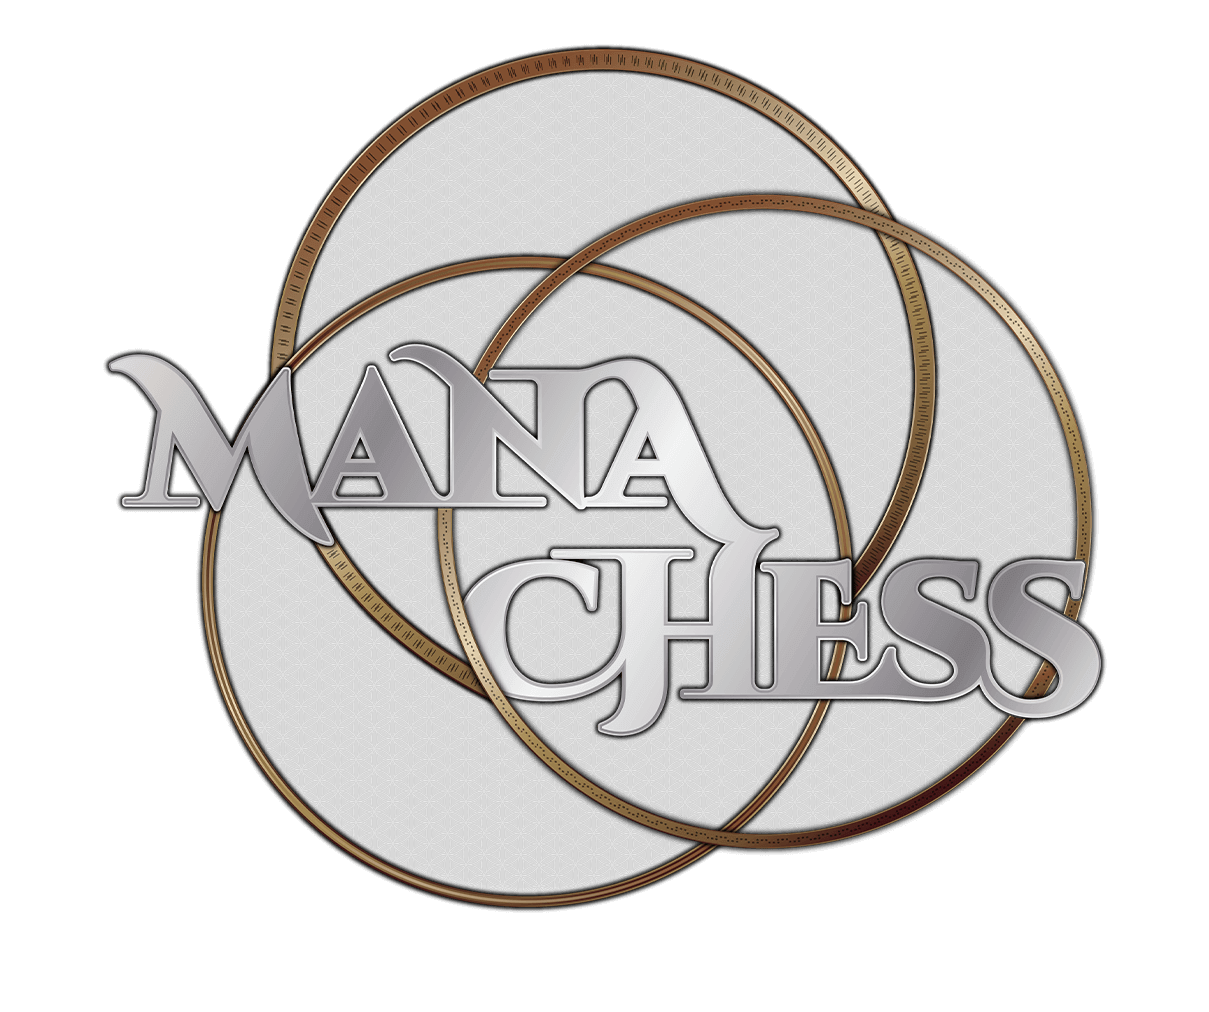 Flat version of Mana Chess logo with gradient silver text and 3 gold rings behind it